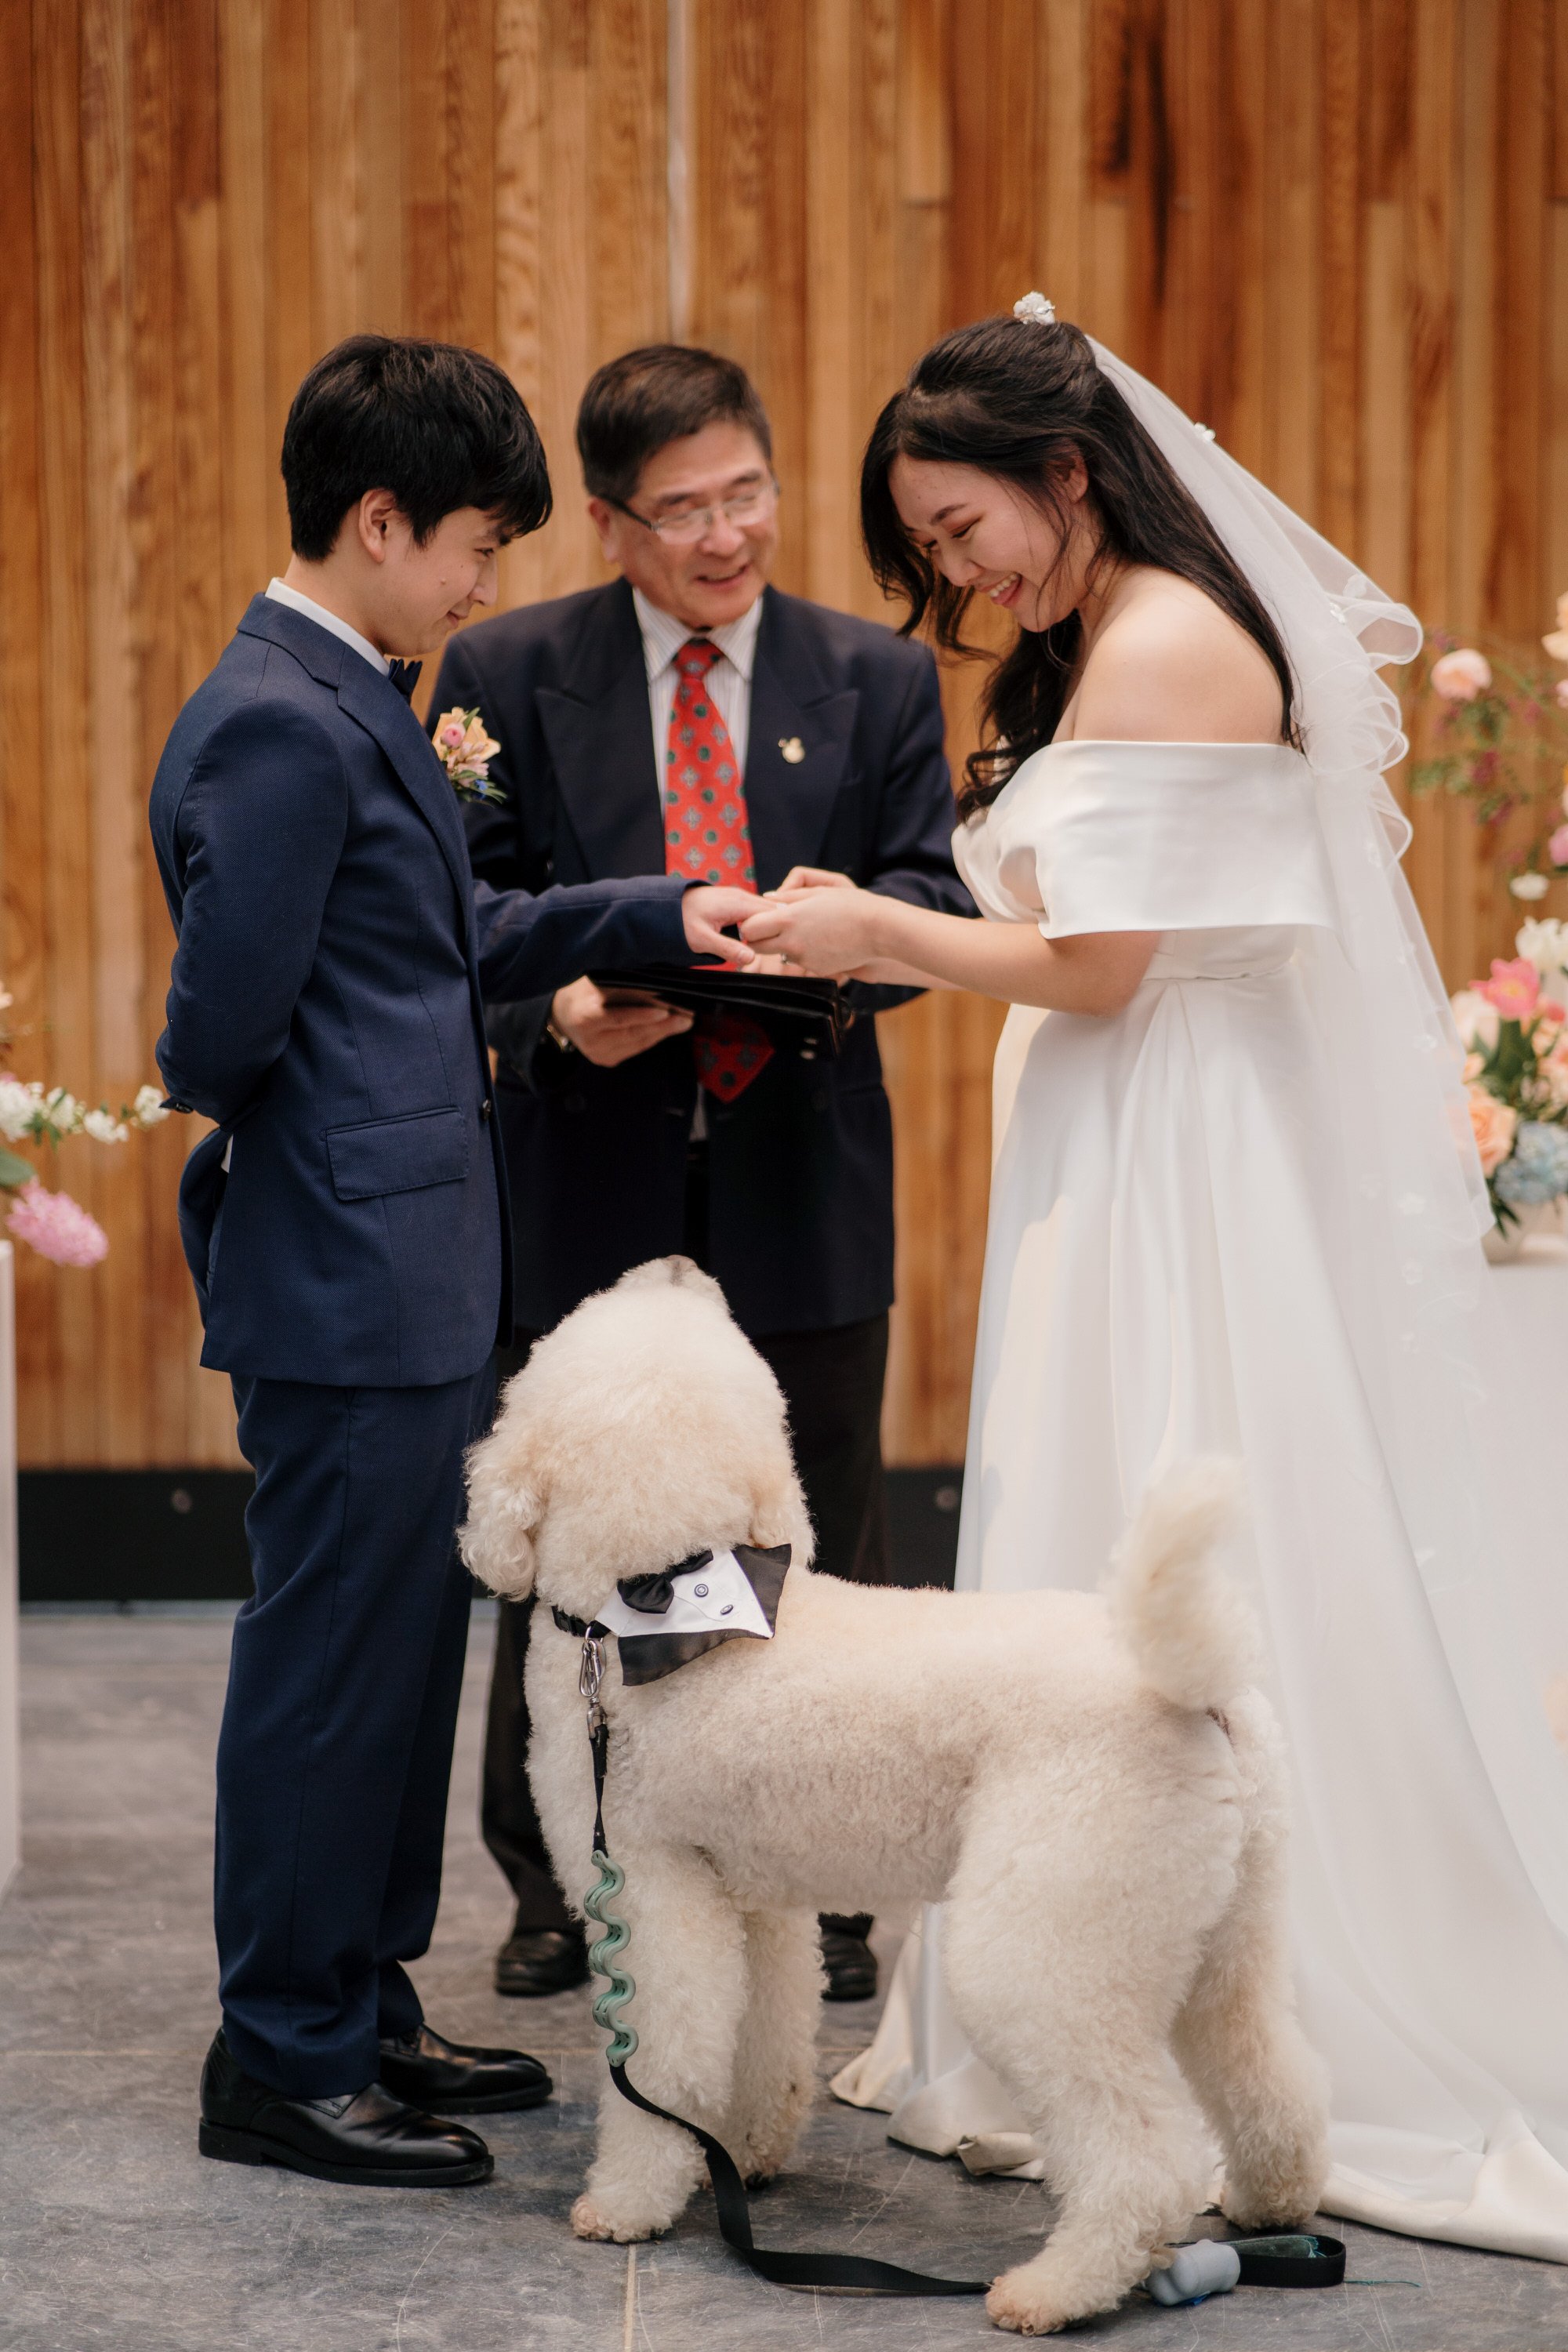 glasshouse-morningside-top-auckland-wedding-phtographer-2023-photography-videography-film-new-zealand-NZ-best-urban-venue-traditional-chinese-ceremony-spring-colourful-pet-dog-dear-white-production (41).jpg